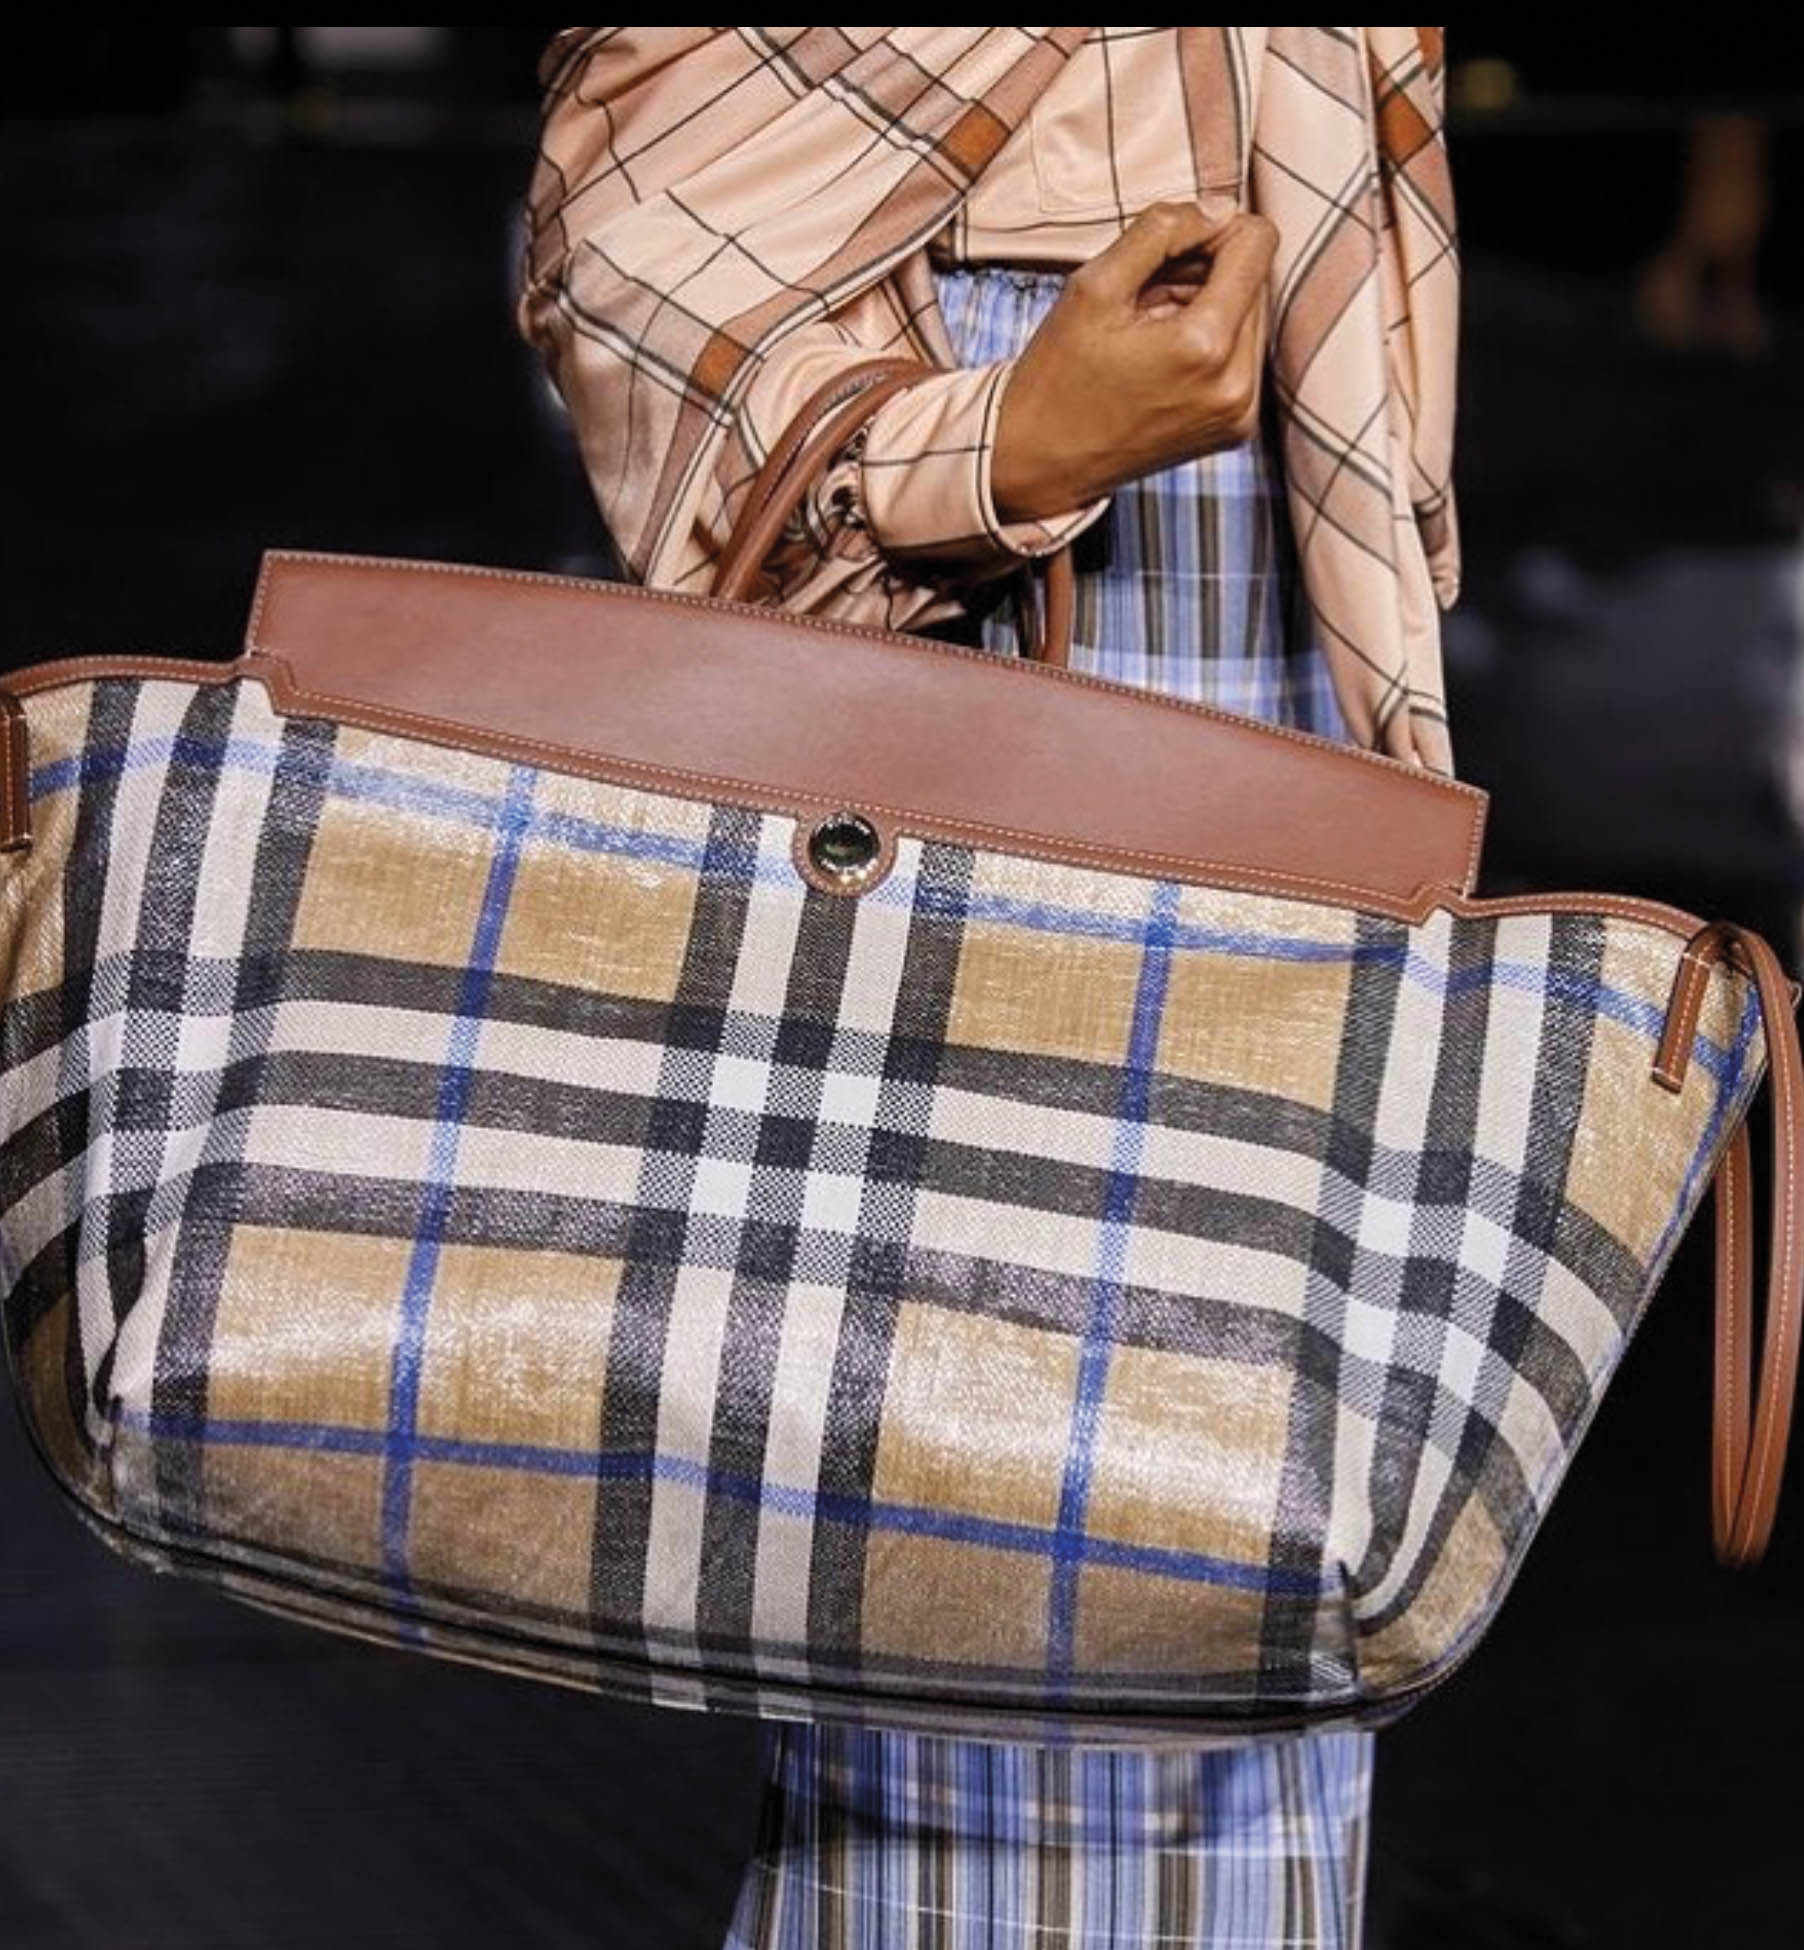 Oversize Burberry plaid purse being held by a model